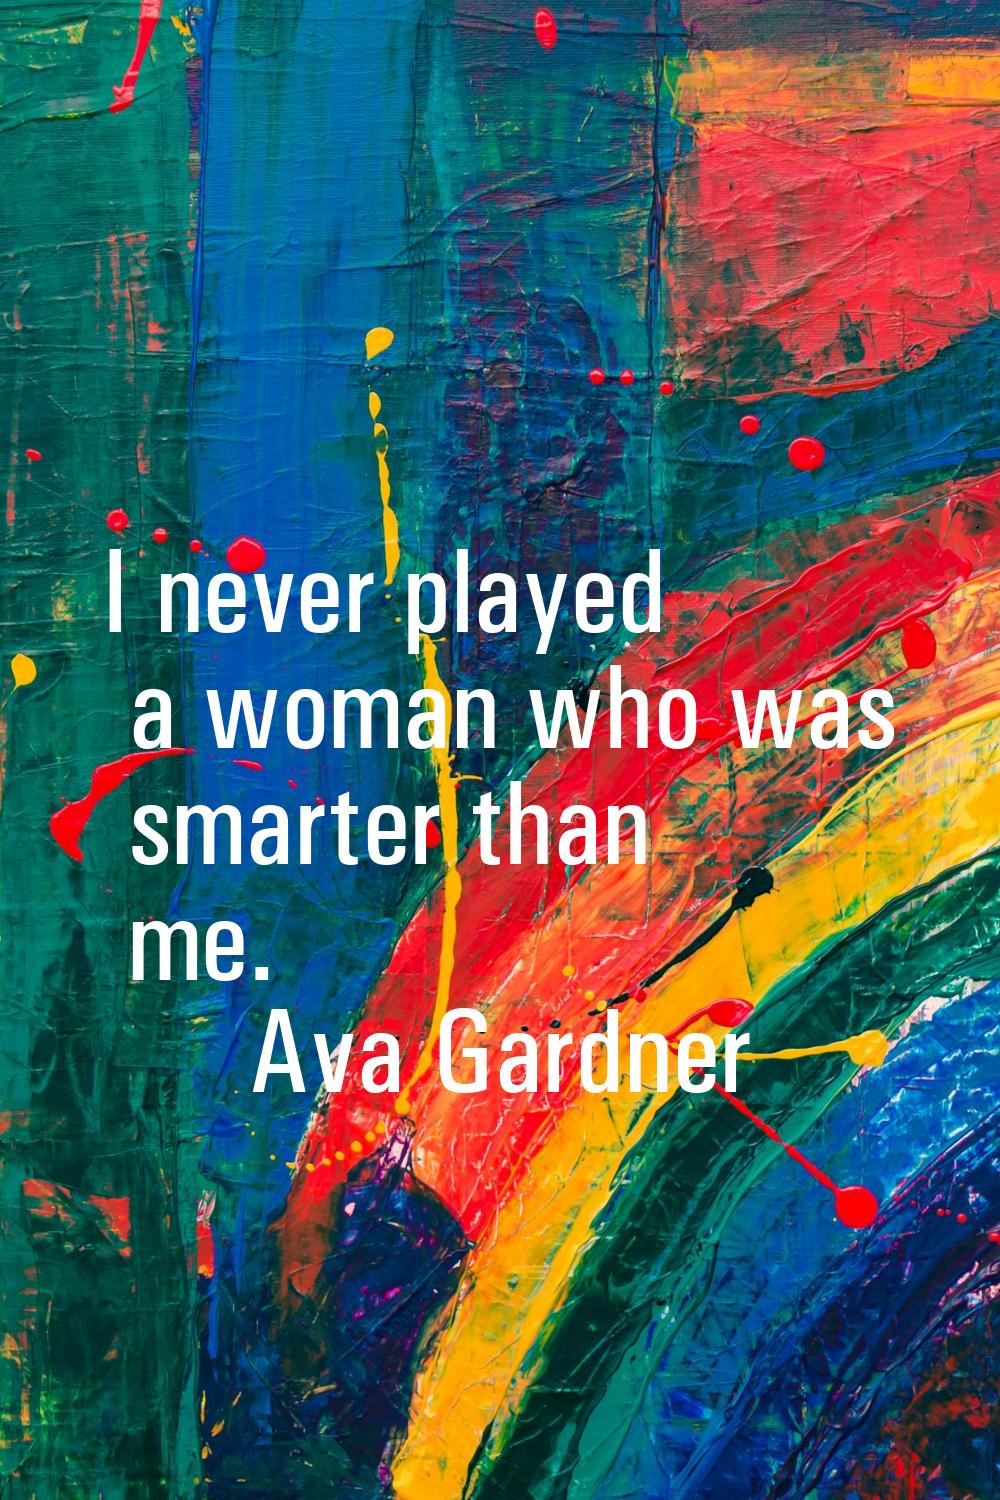 I never played a woman who was smarter than me.